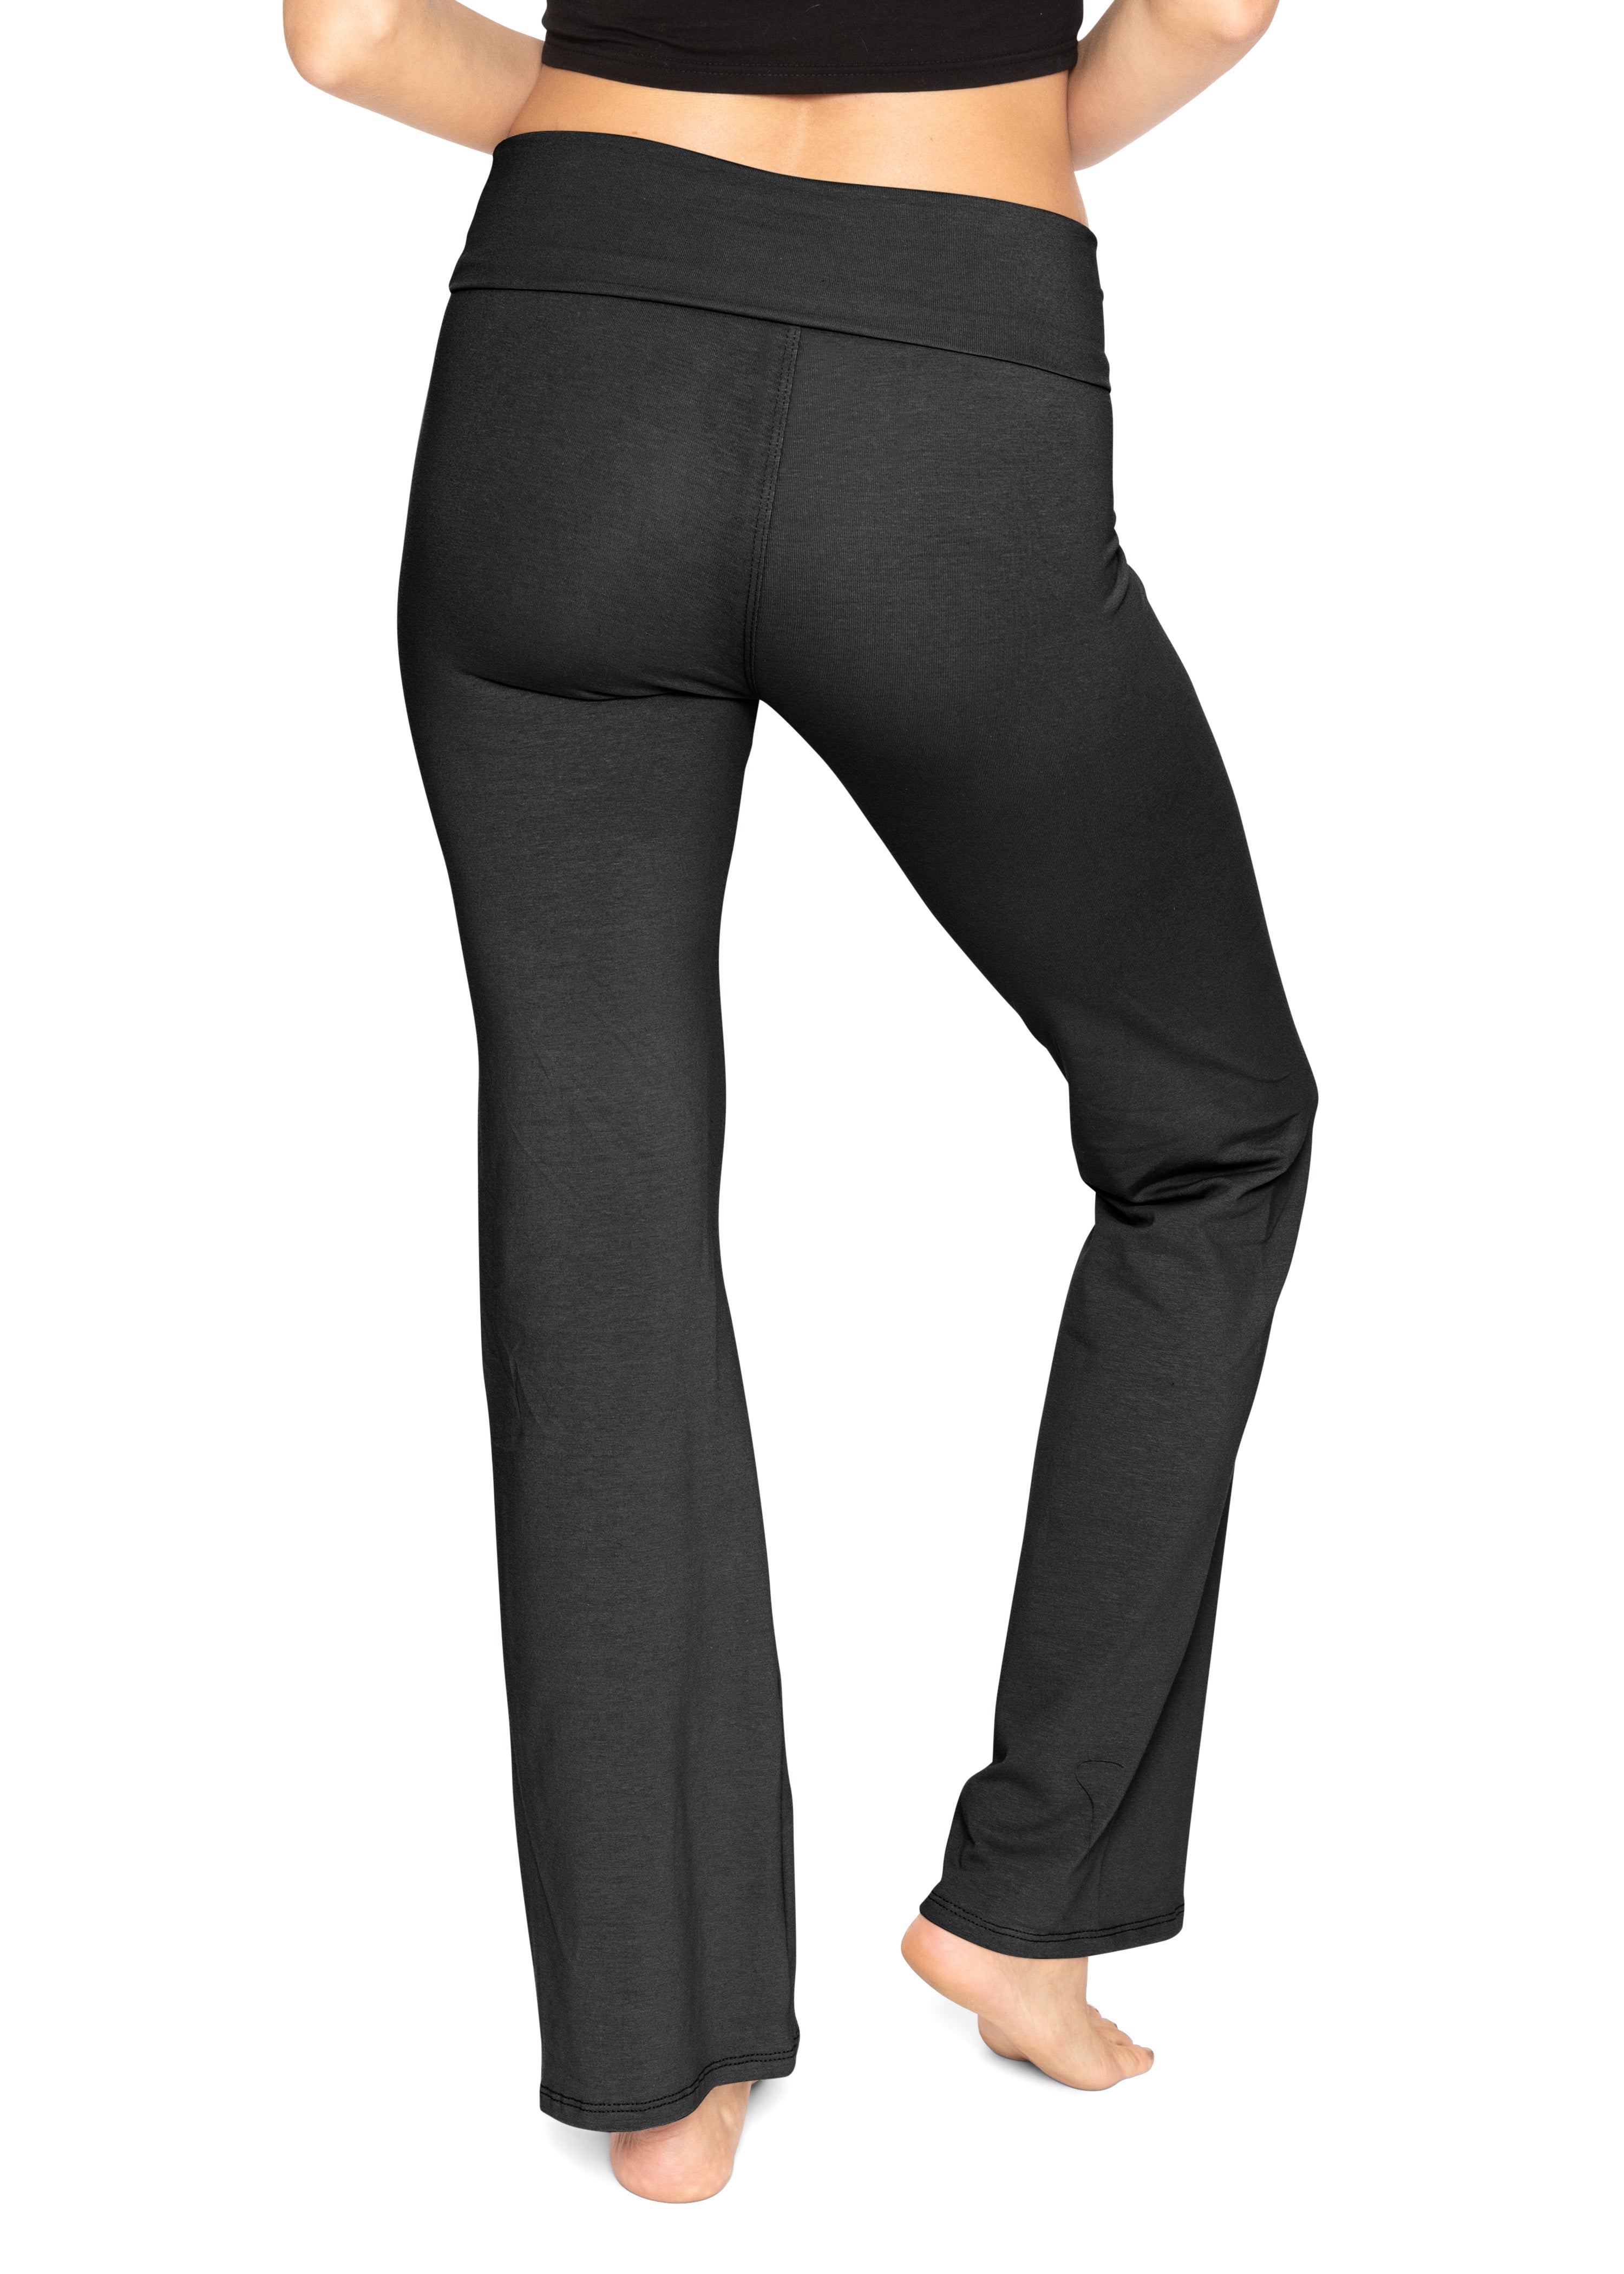 Stretch Is Comfort Women's Foldover Yoga Pant | Adult Small -7x - image 3 of 6